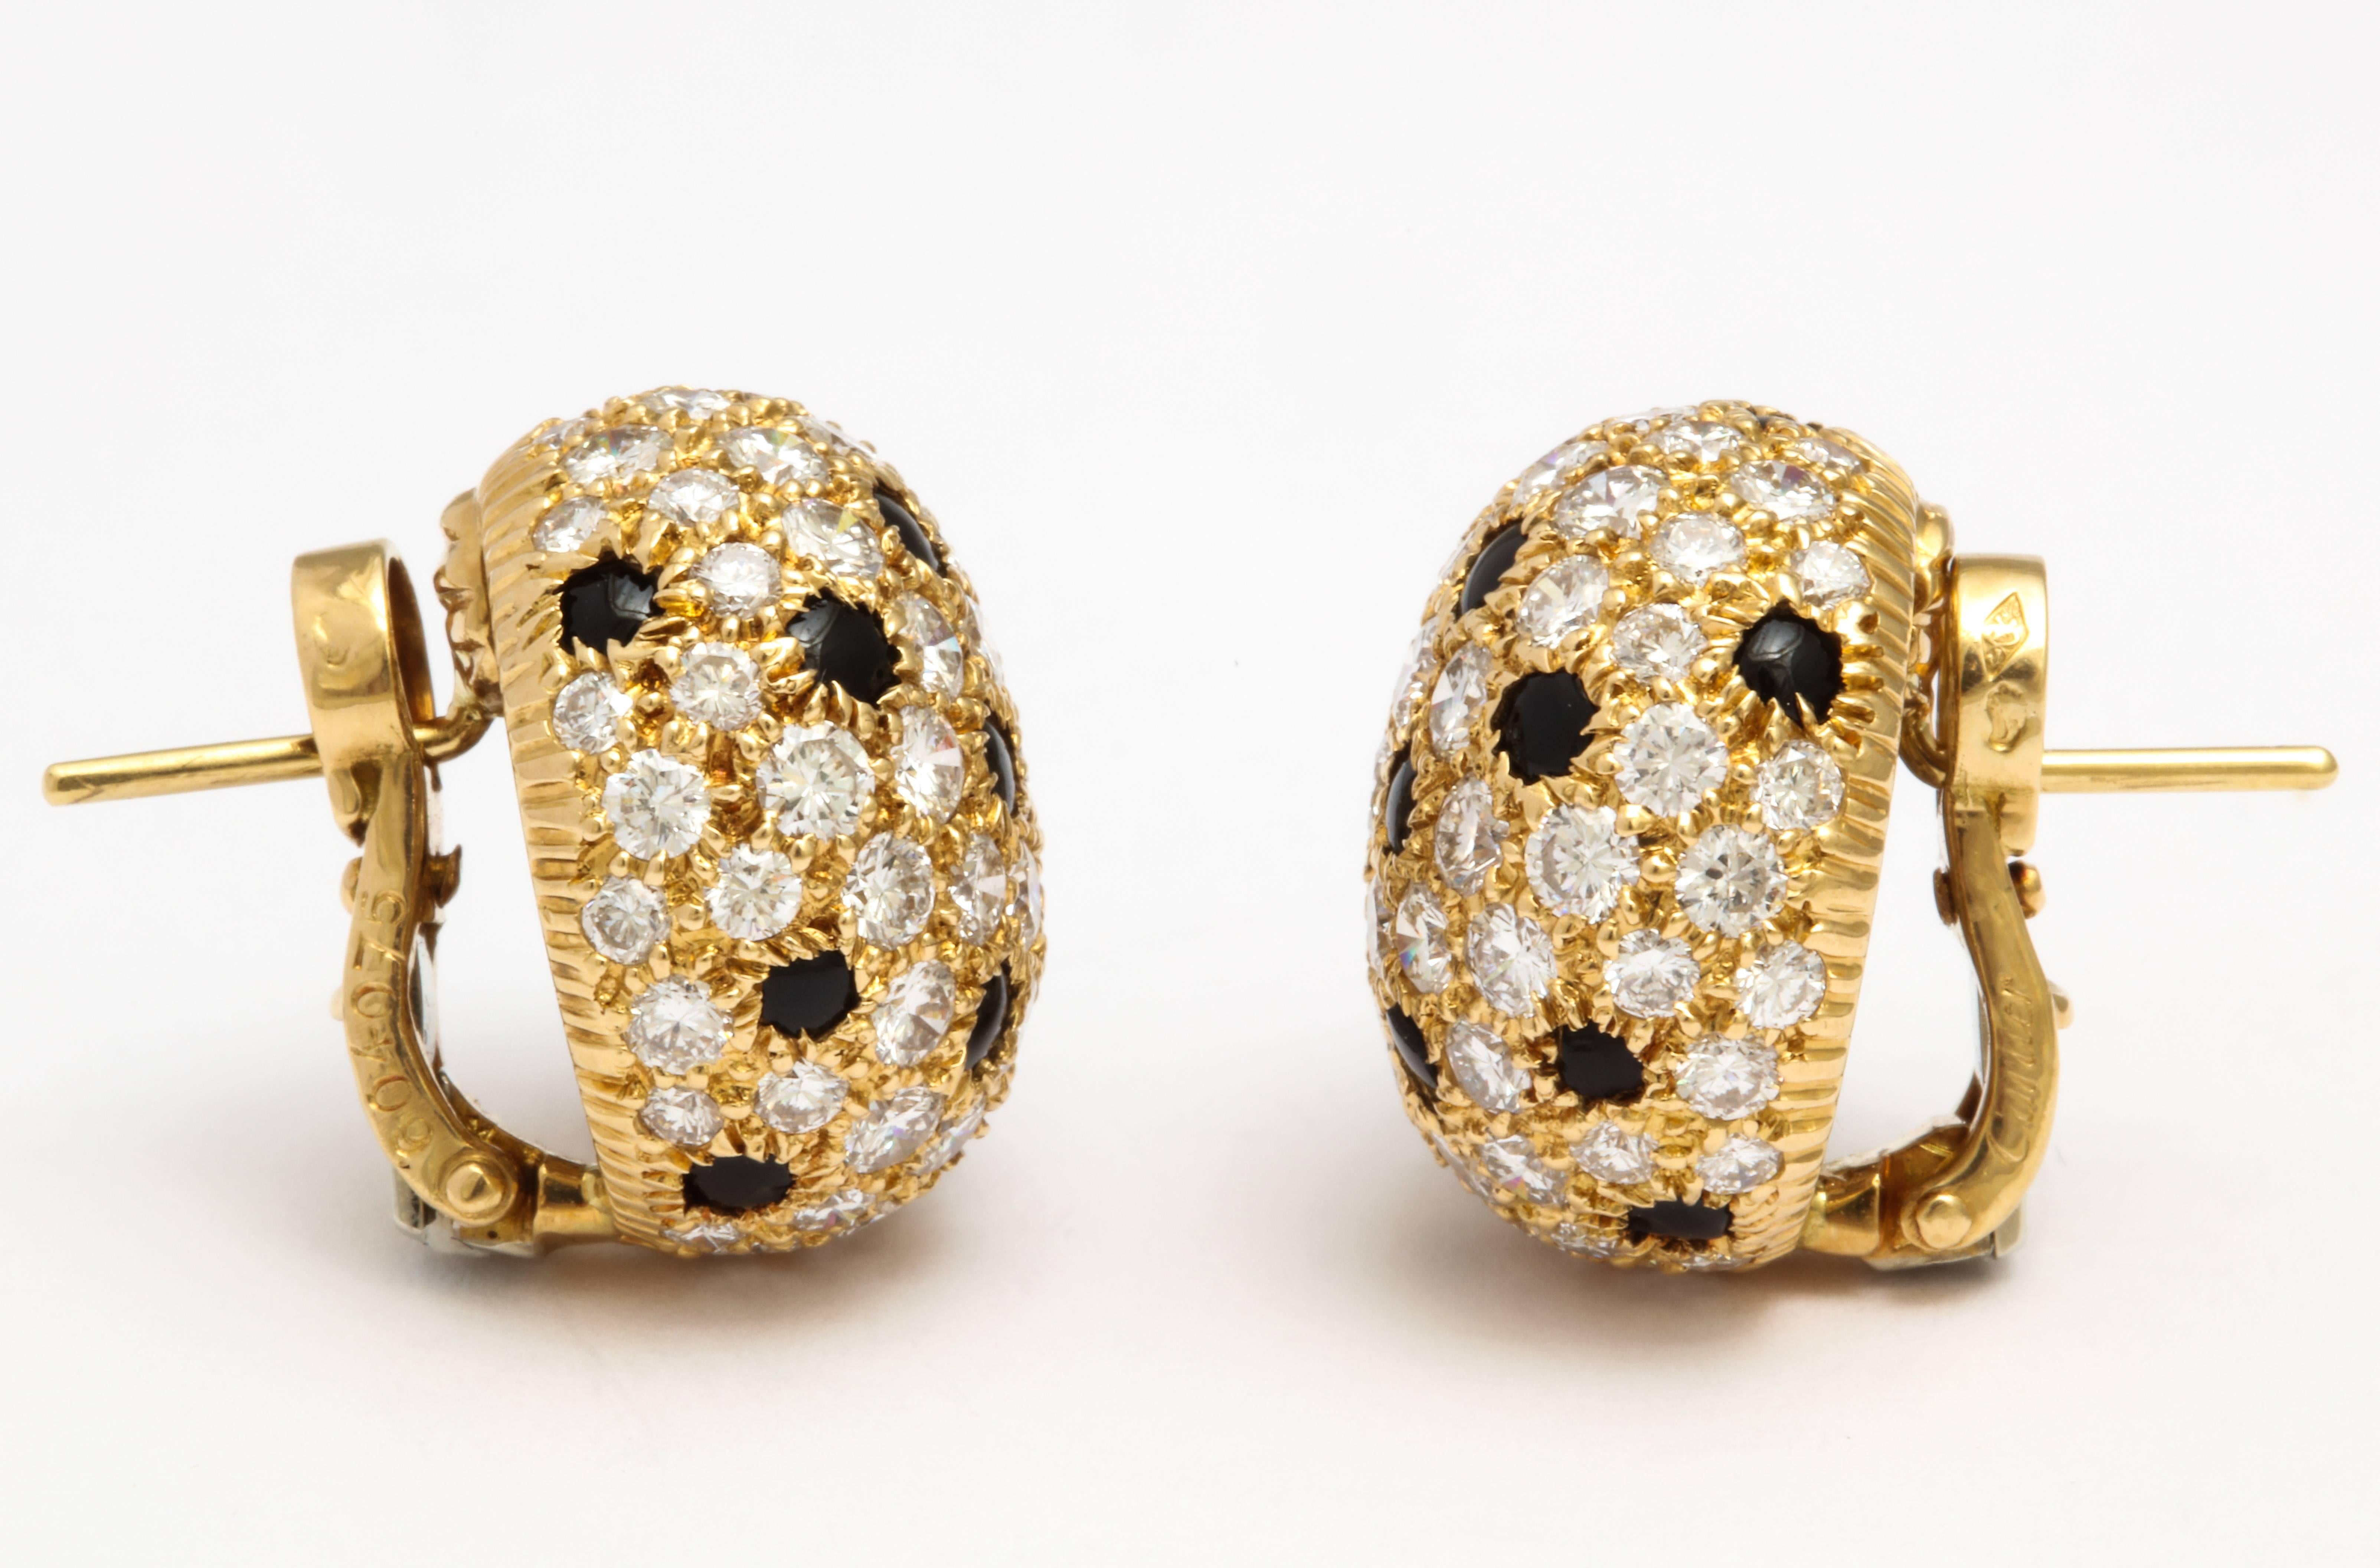 A pair of earrings by Cartier set in 18 karat yellow gold. Each bombé circular cluster has pavé-set brilliant-cut diamonds with a total weight of approximately 6 carats, and is interspersed by buff-top onyx spot detail. French marks. 

Signed